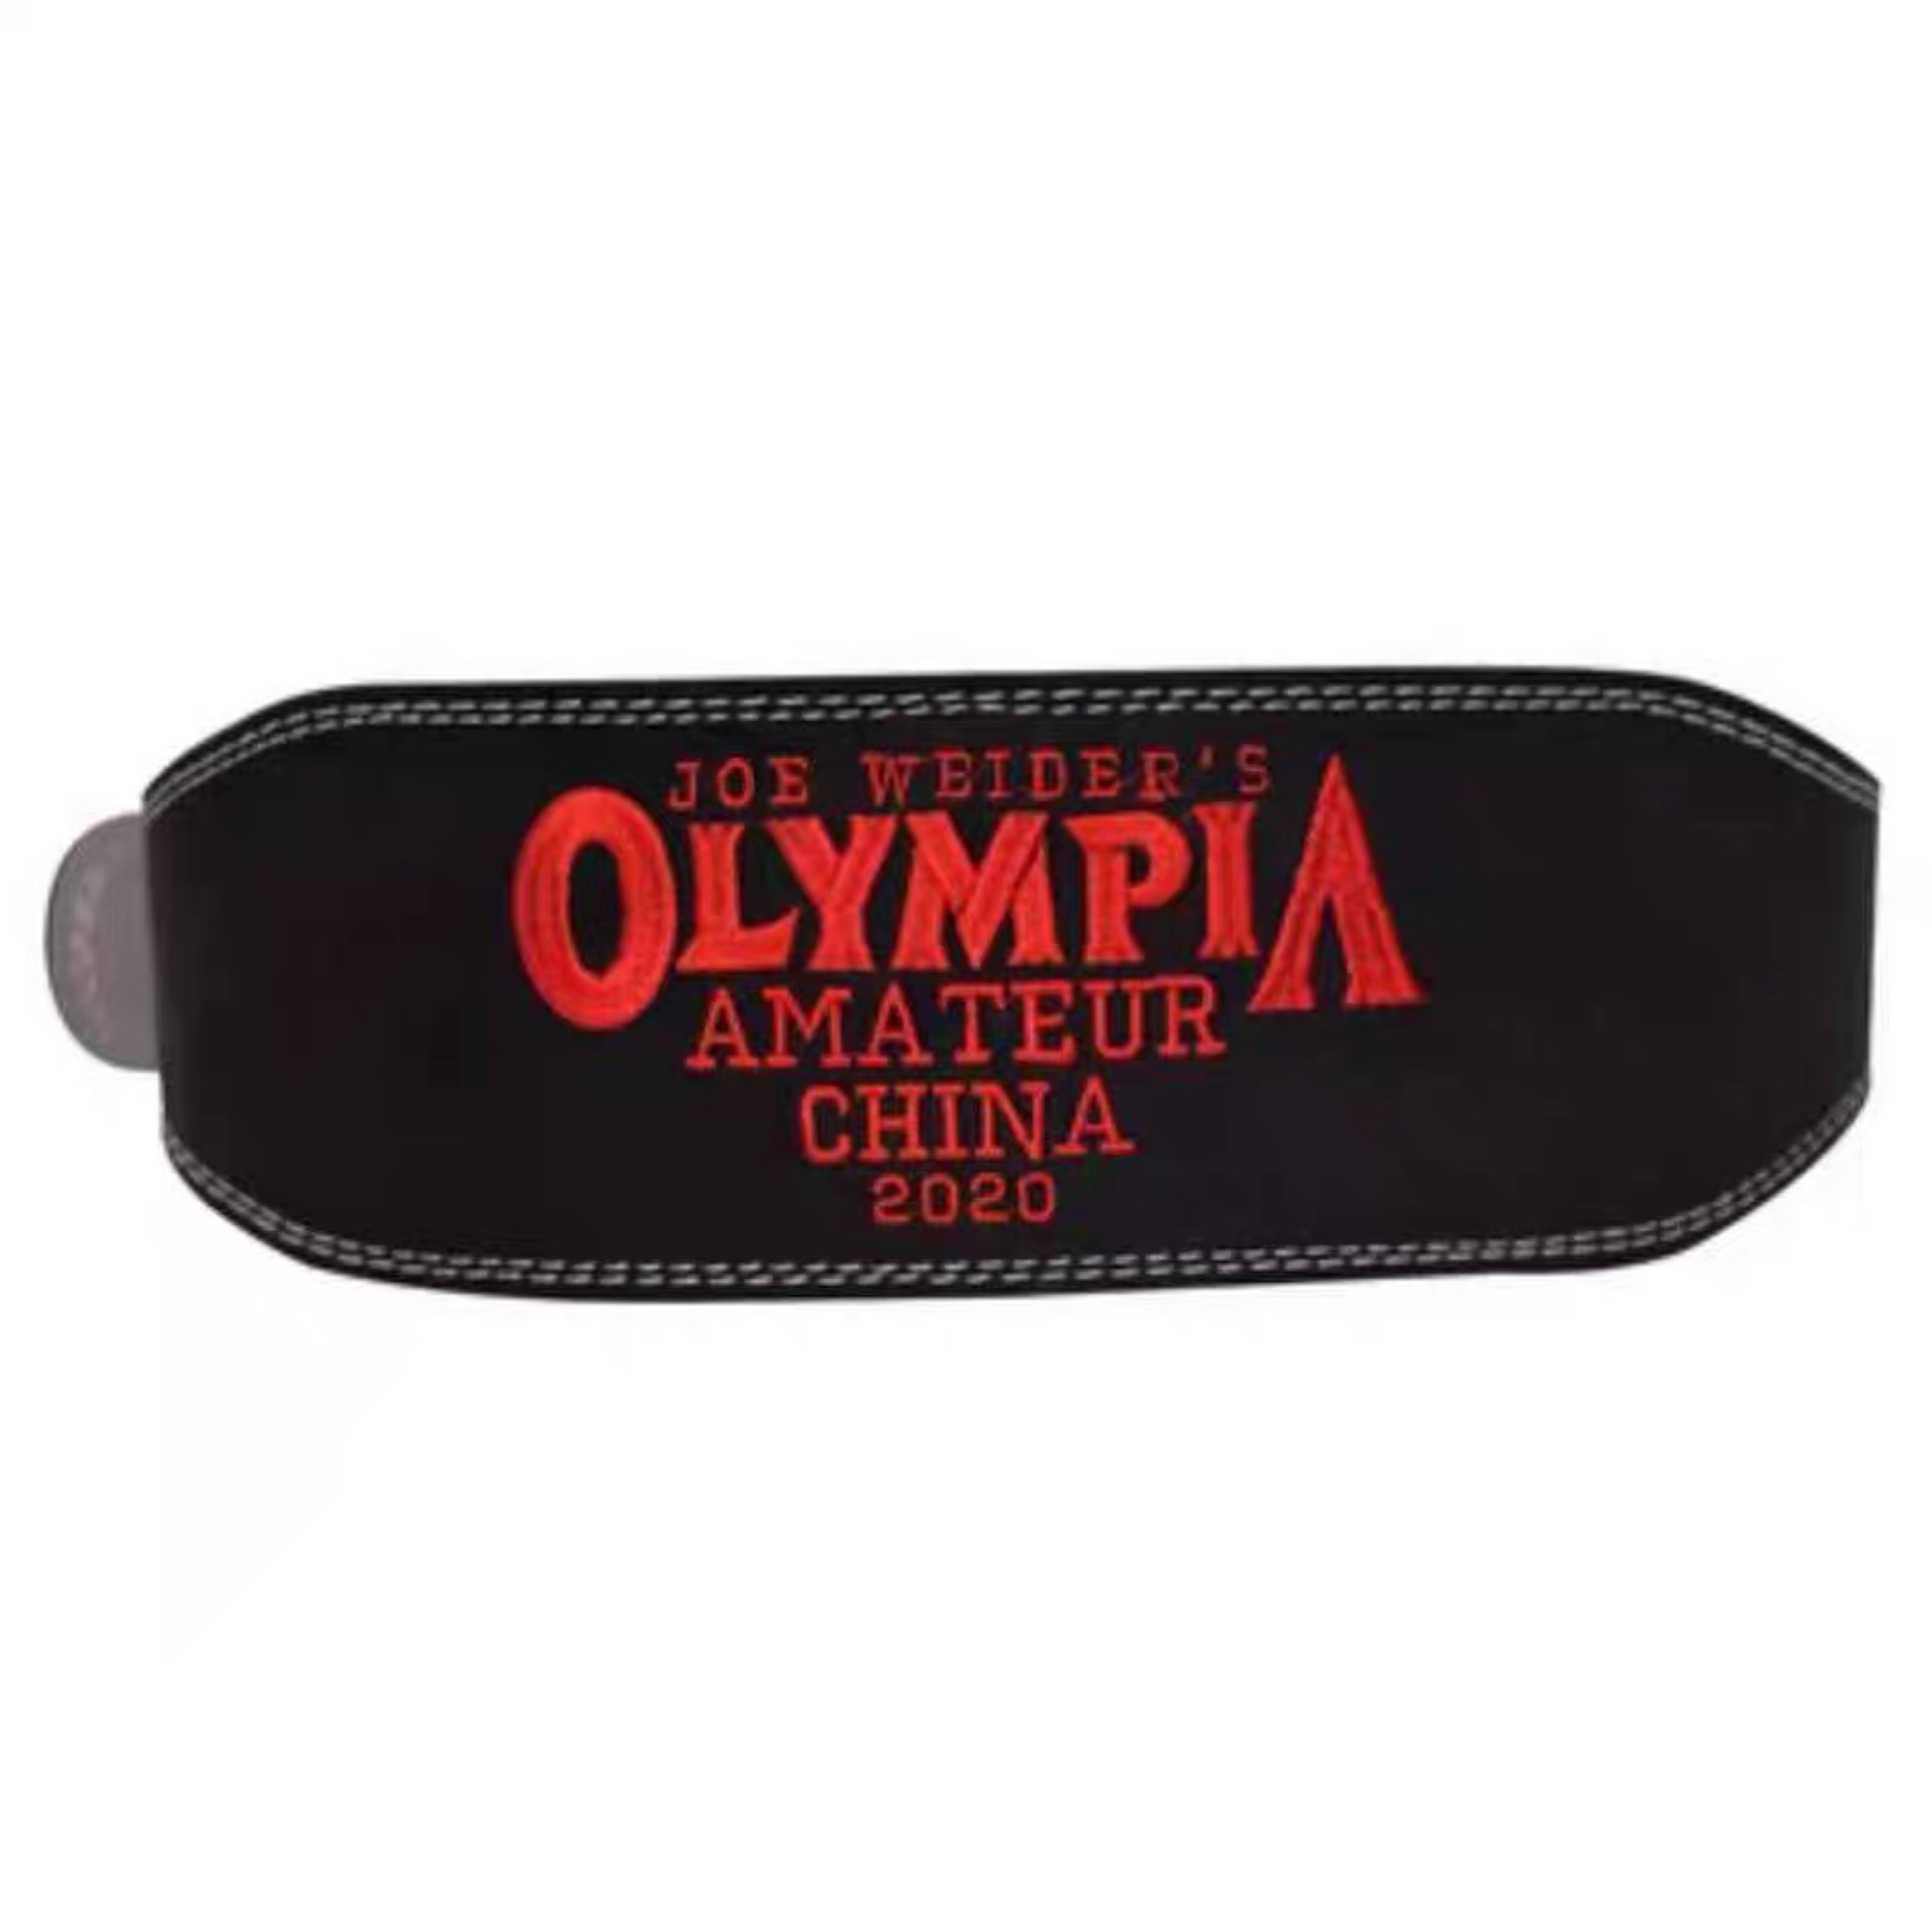 MR OLYMPIA AMATEUR 2020 CHINA Lifting Belt – GS- Gymspecialist